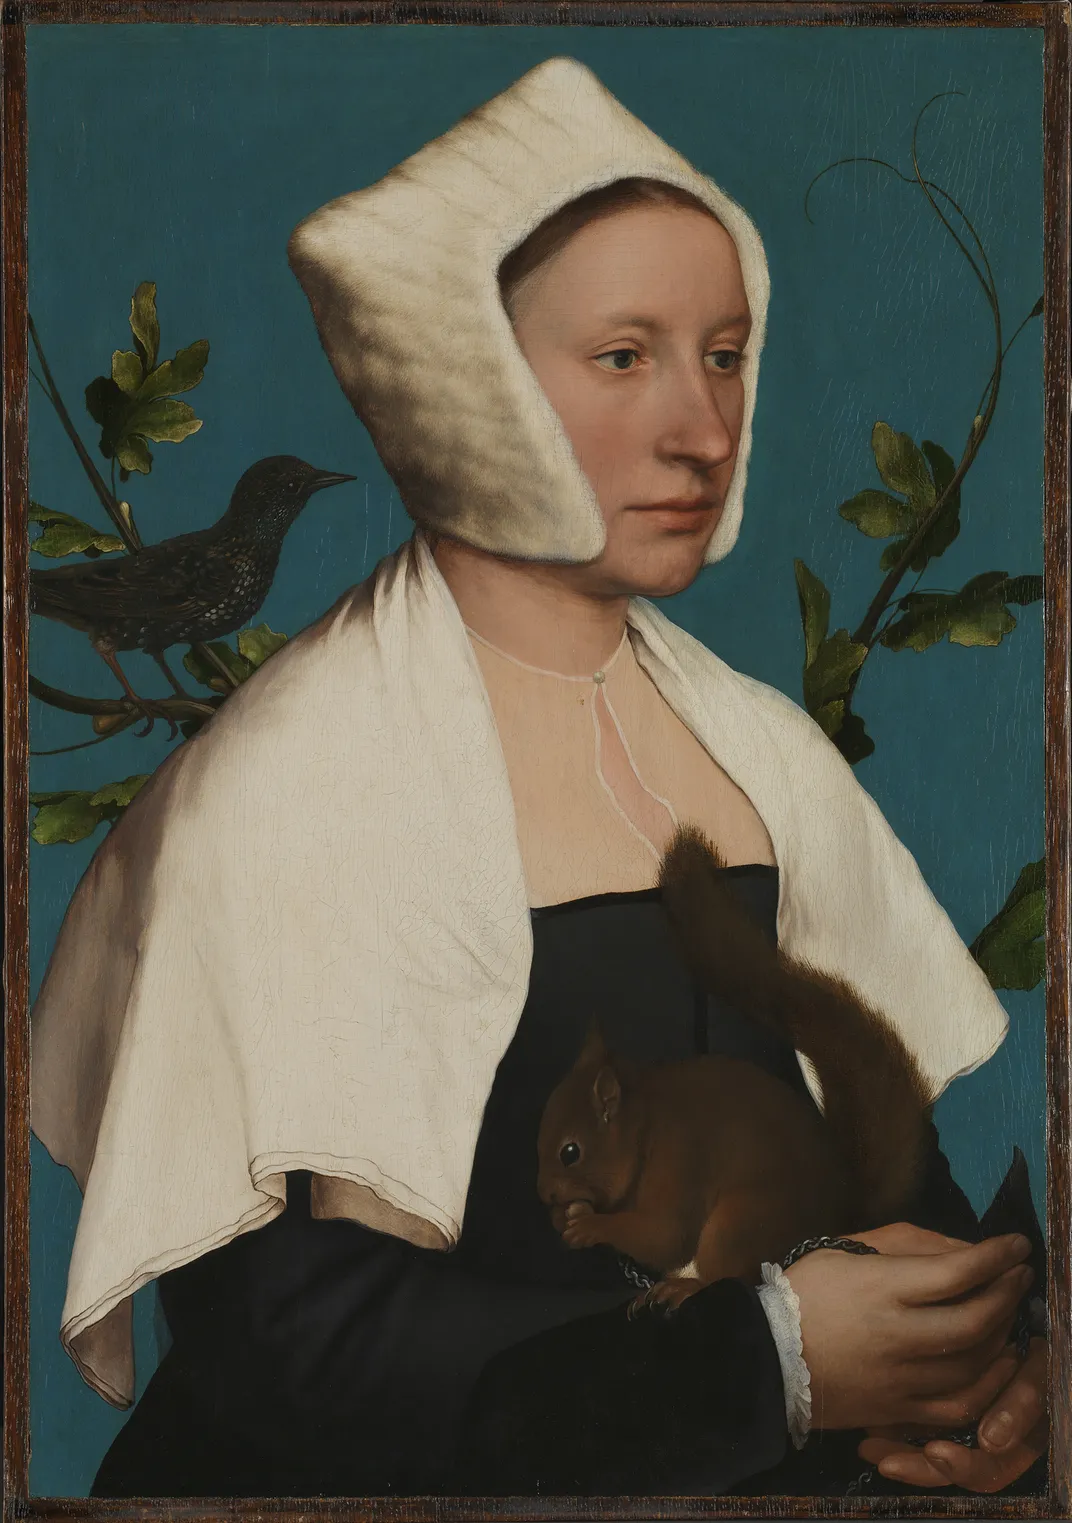 A portrait of a pale woman holding a small red squirrel in front of a blue-green background, with a starling (bird) perched over her right shoulder